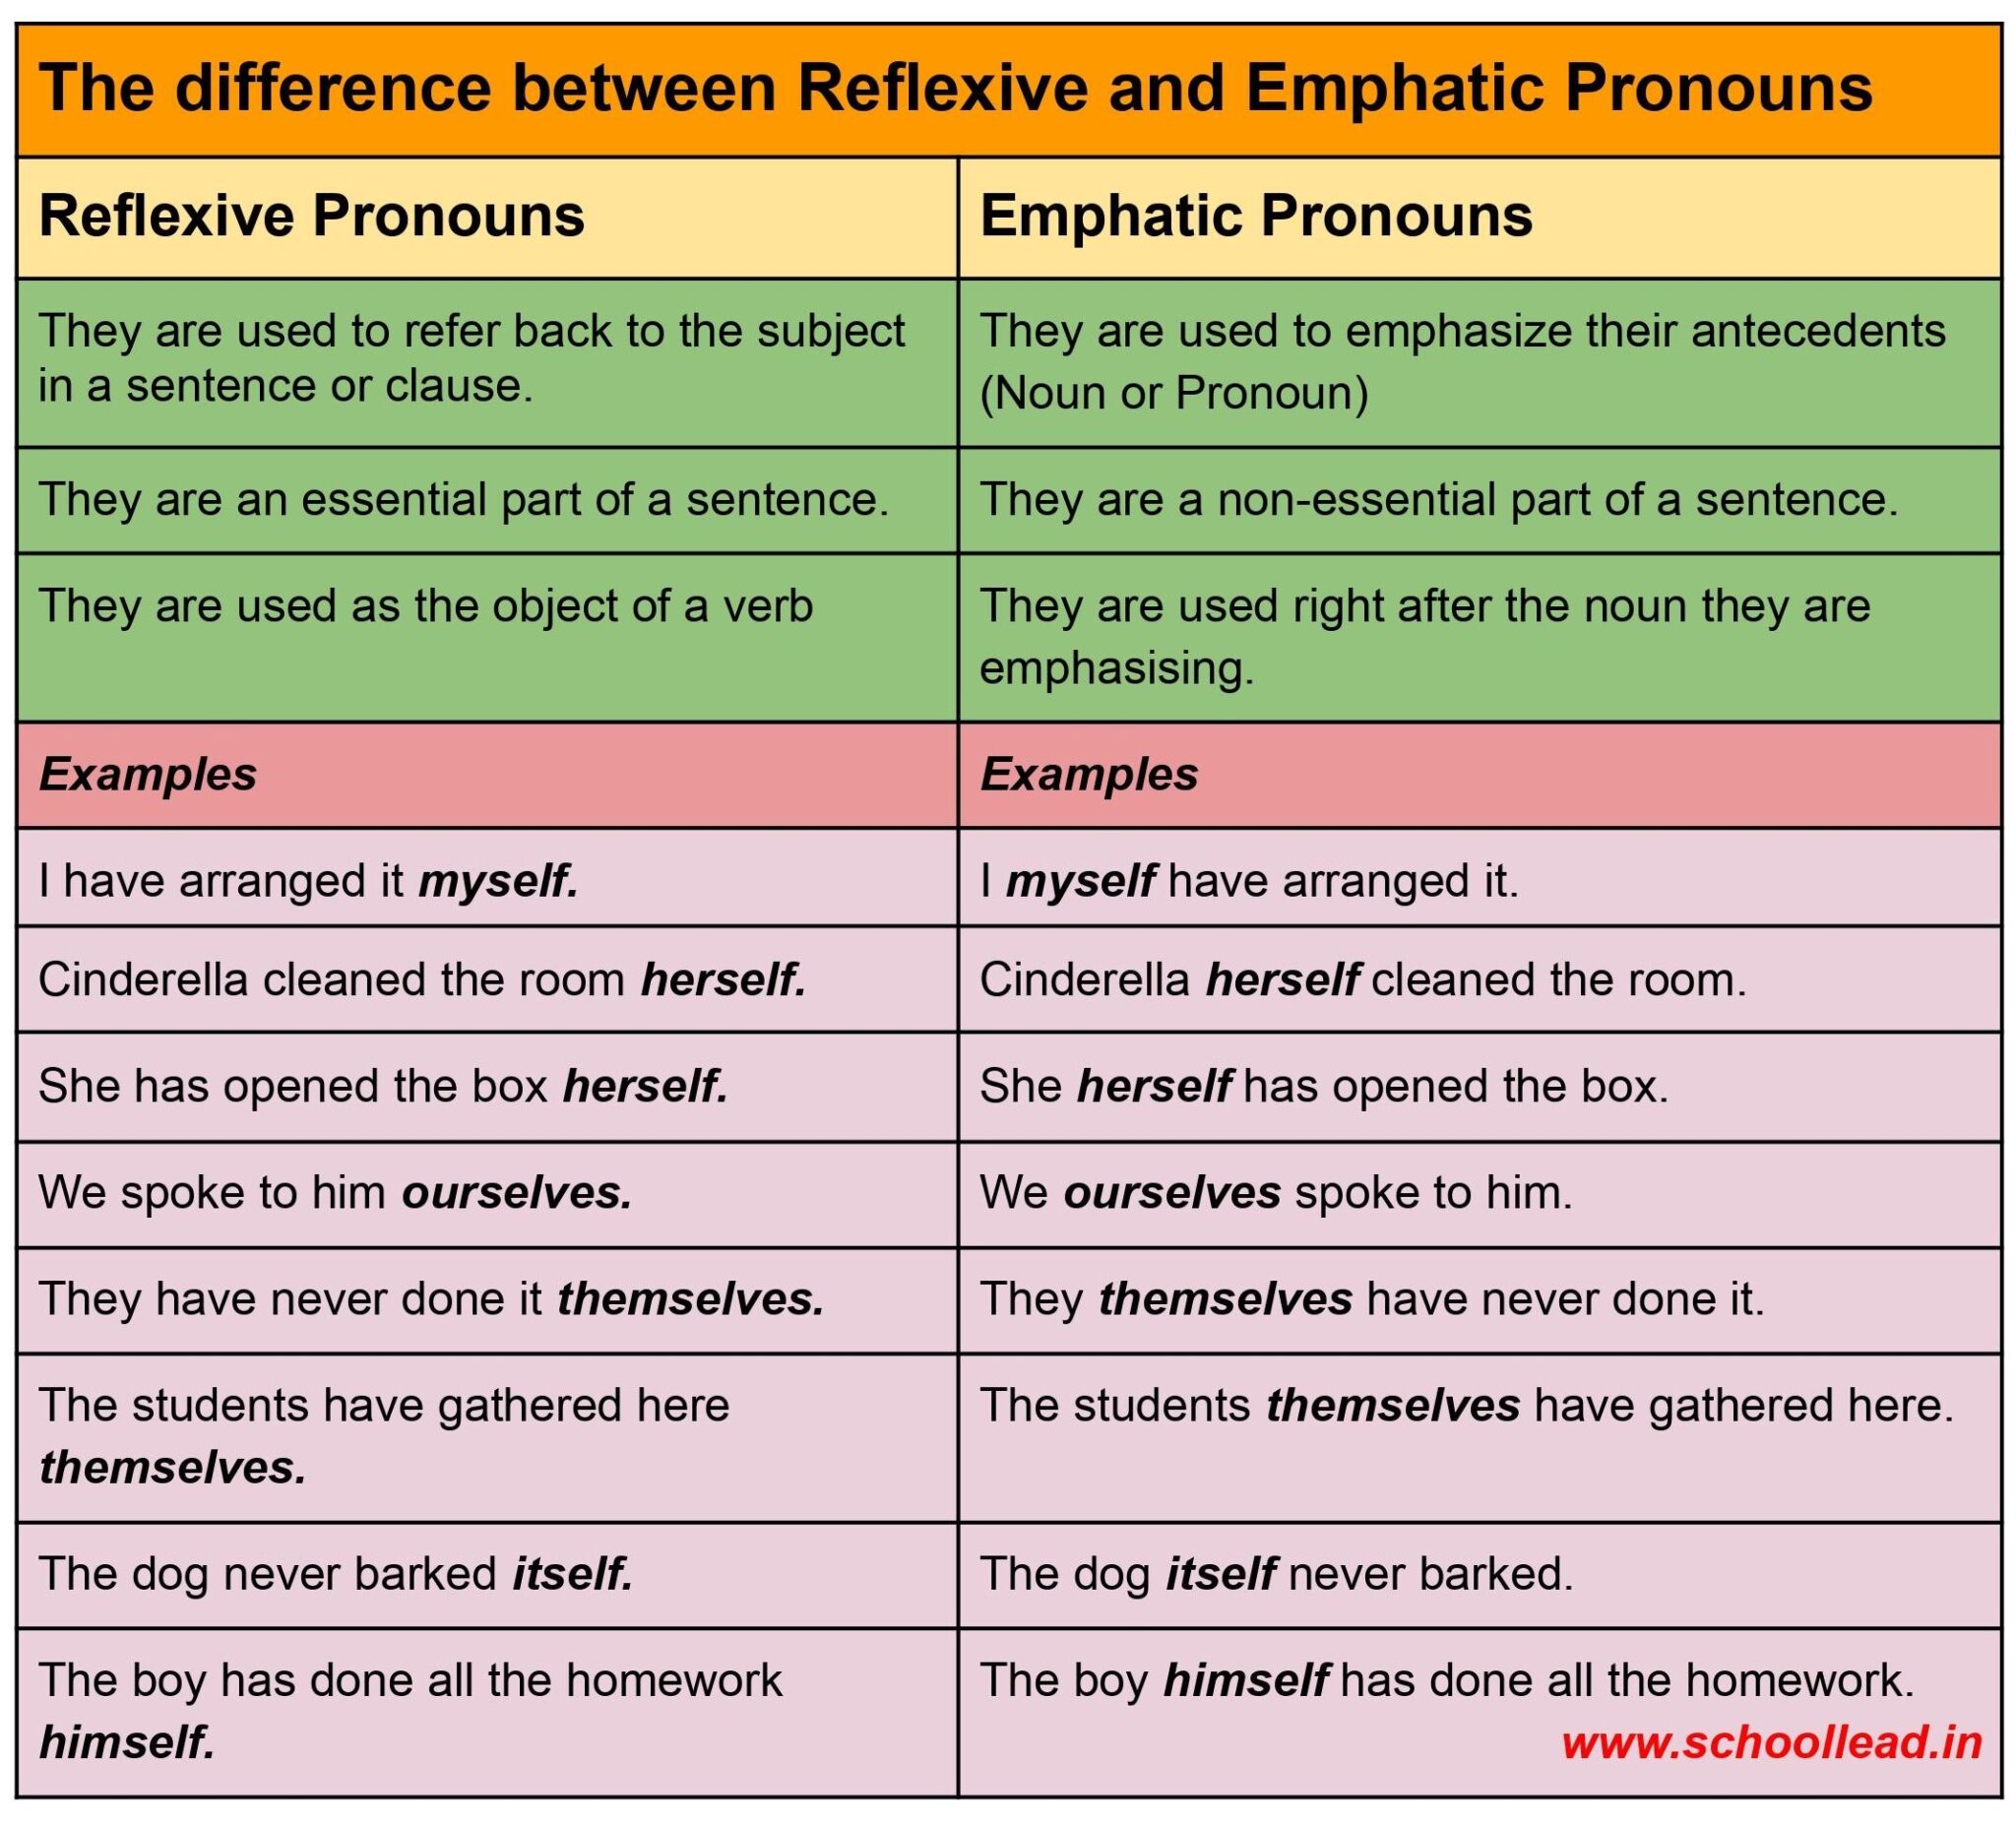 reflexive-and-emphatic-pronouns-school-lead